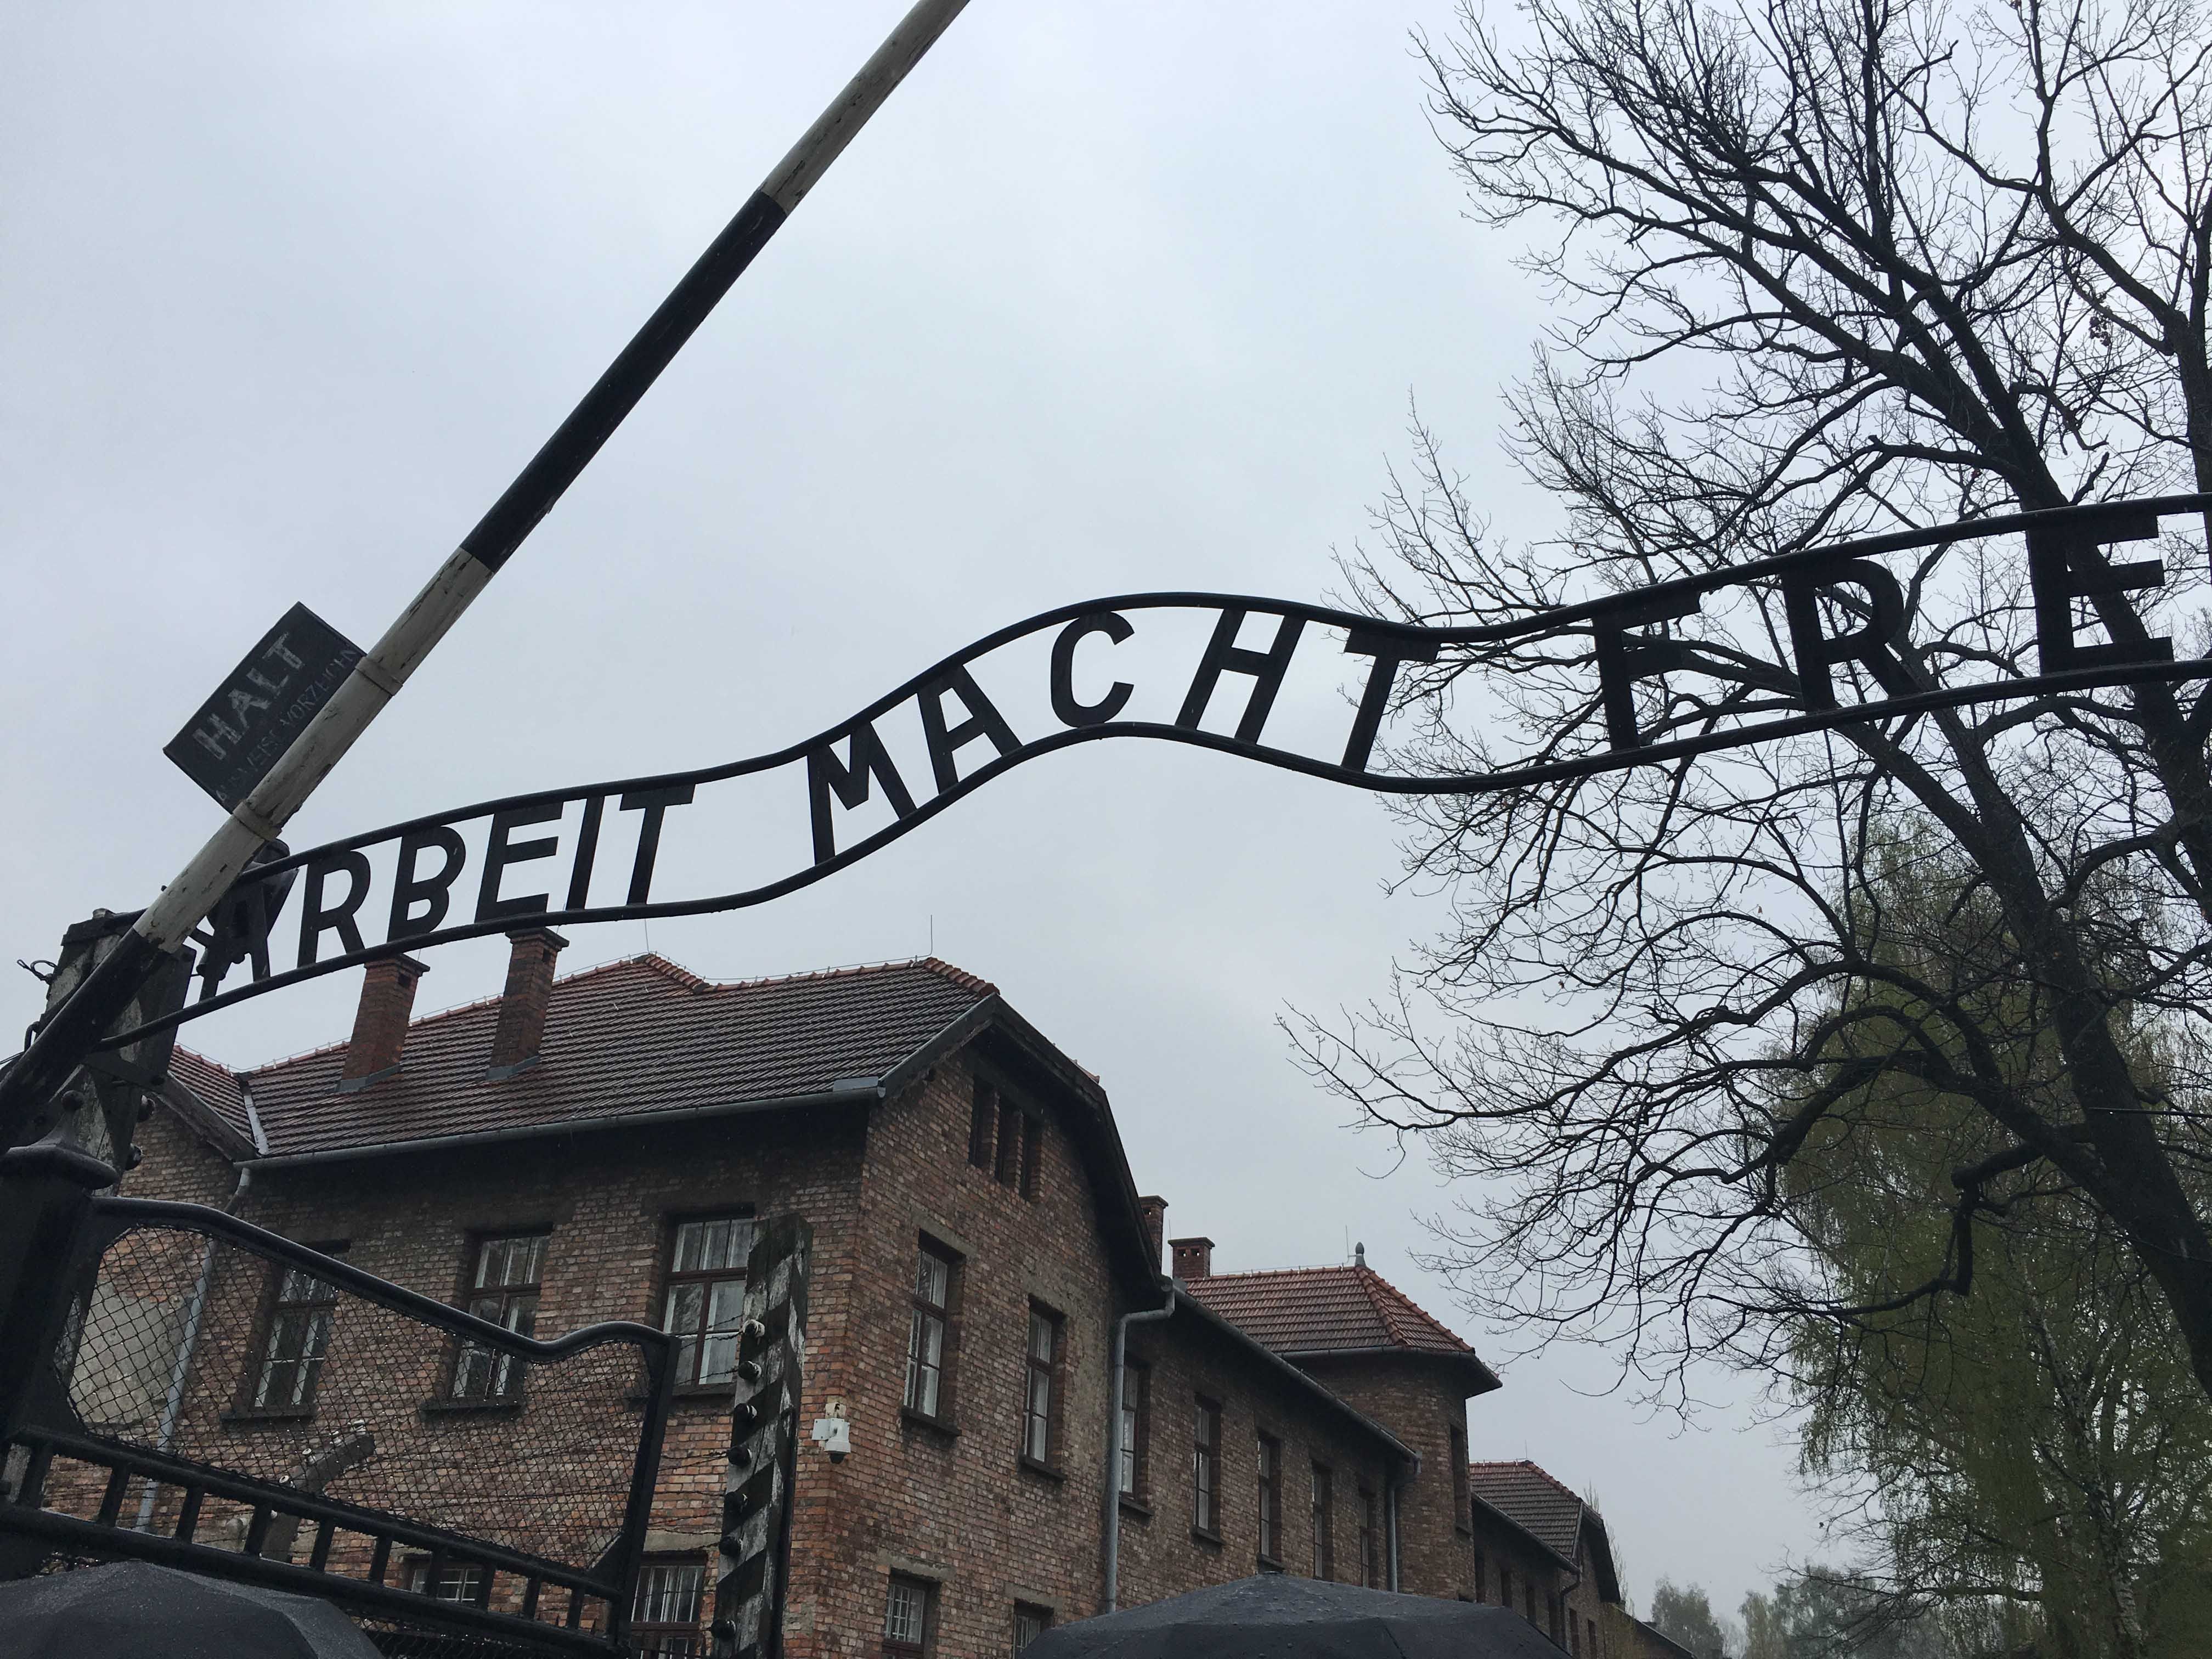 Lessons from Auschwitz-Birkenau, Monday 11 and Thursday 14 April